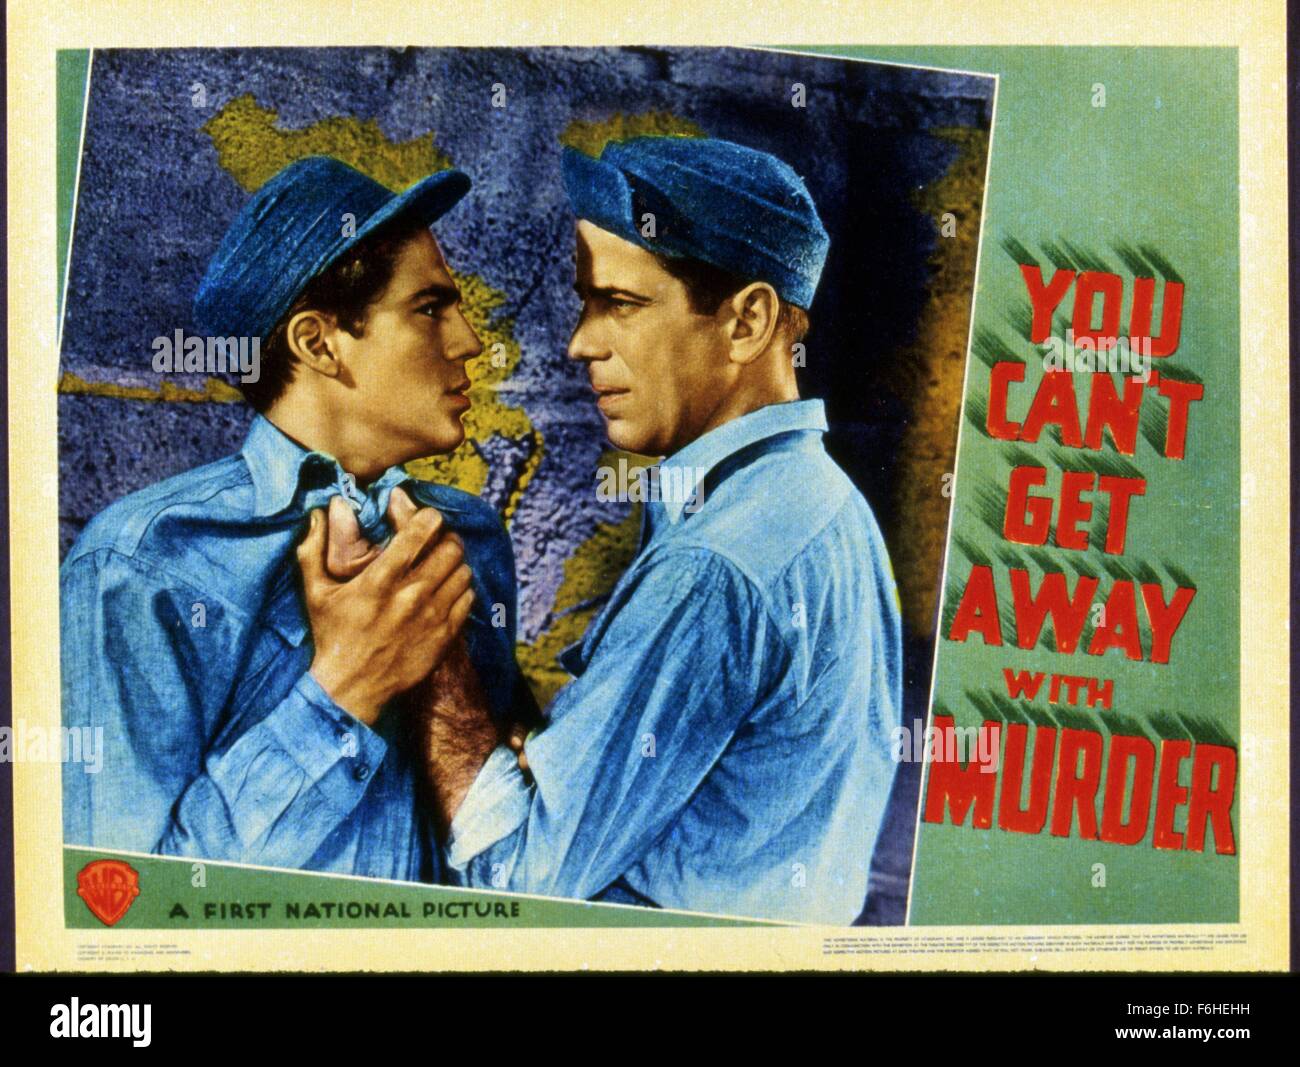 1939, Film Title: YOU CAN'T GET AWAY WITH MURDER, Director: LEWIS SEILER, Studio: WARNER, Pictured: HUMPHREY BOGART, BILLY HALOP, FIGHT, UNIFORM, CONFLICT, LOBBY CARD, TOUGH LOVE. (Credit Image: SNAP) Stock Photo